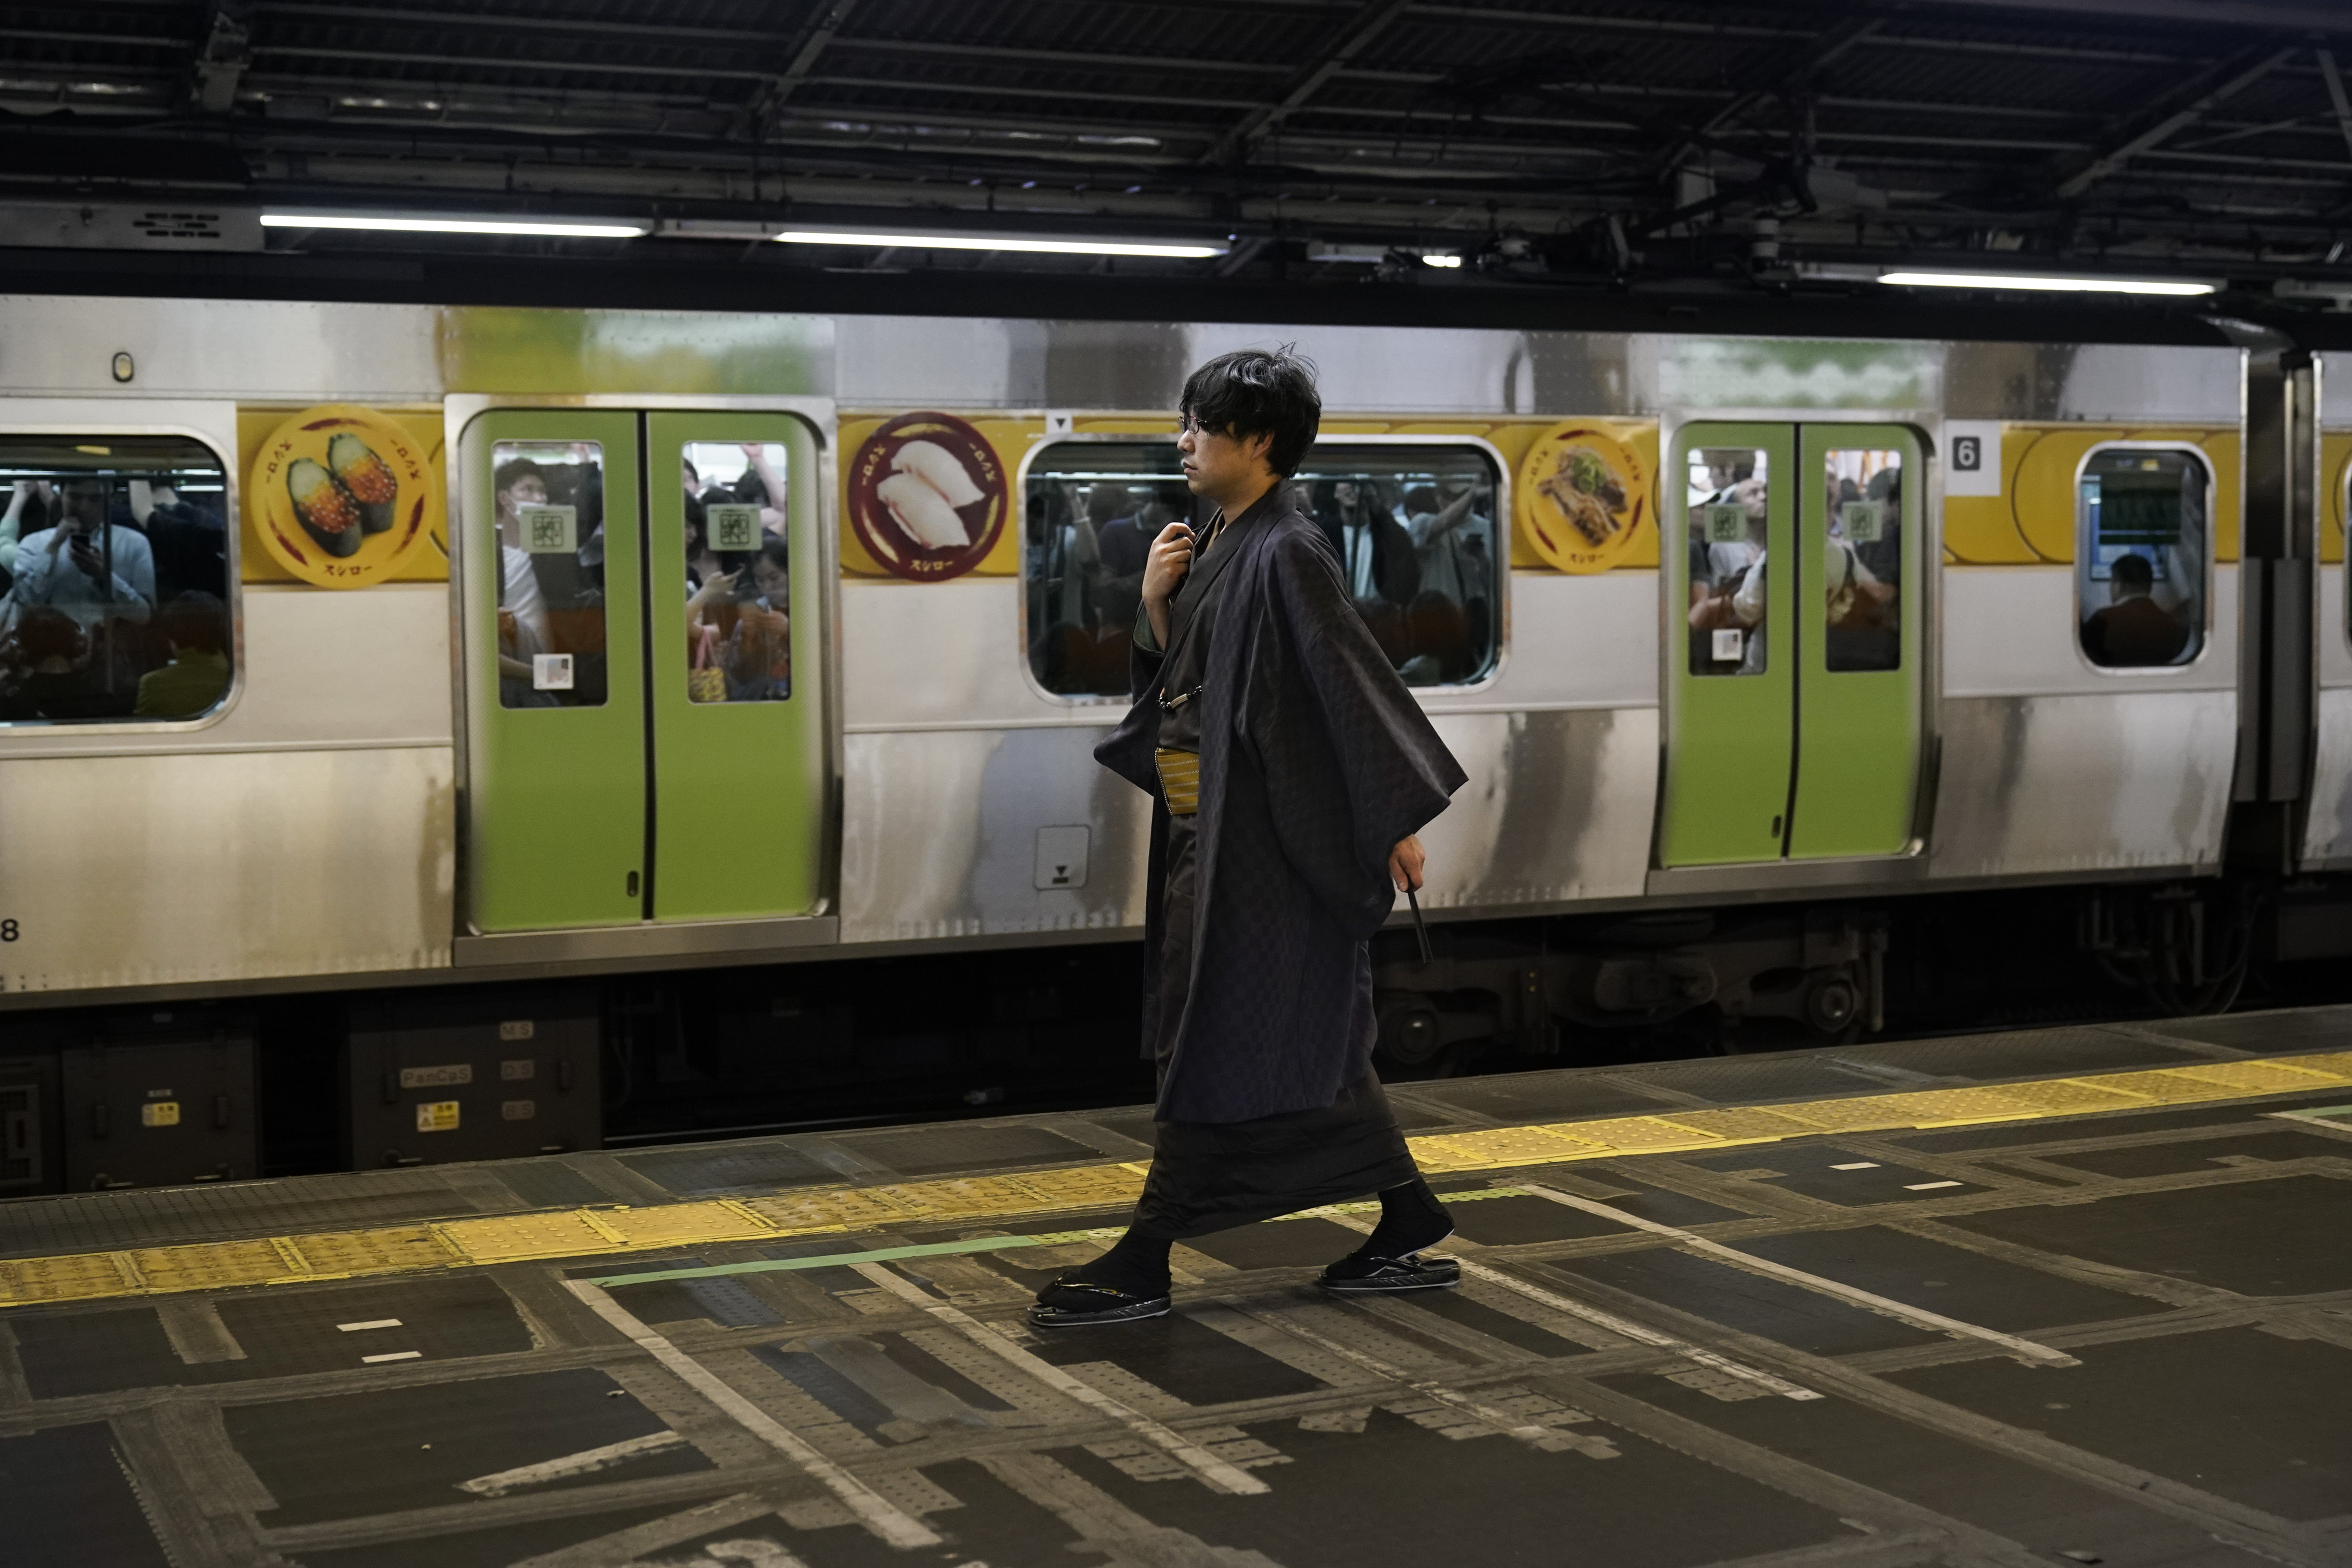 In this Saturday, May 25, 2019, photo, a young man wearing a traditional kimono walks past a packed Yamanote Line train at Shinjuku Station in Tokyo. Operated by the East Japan Railway Co., the Yamanote Line in Tokyo makes a loop around the center of the city, connecting 29 stations that include key stops such as Shinjuku, Shibuya and Ikebukuro. A complete loop of about an hour offers scenes of Japanese daily lives. (AP Photo/Jae C. Hong)